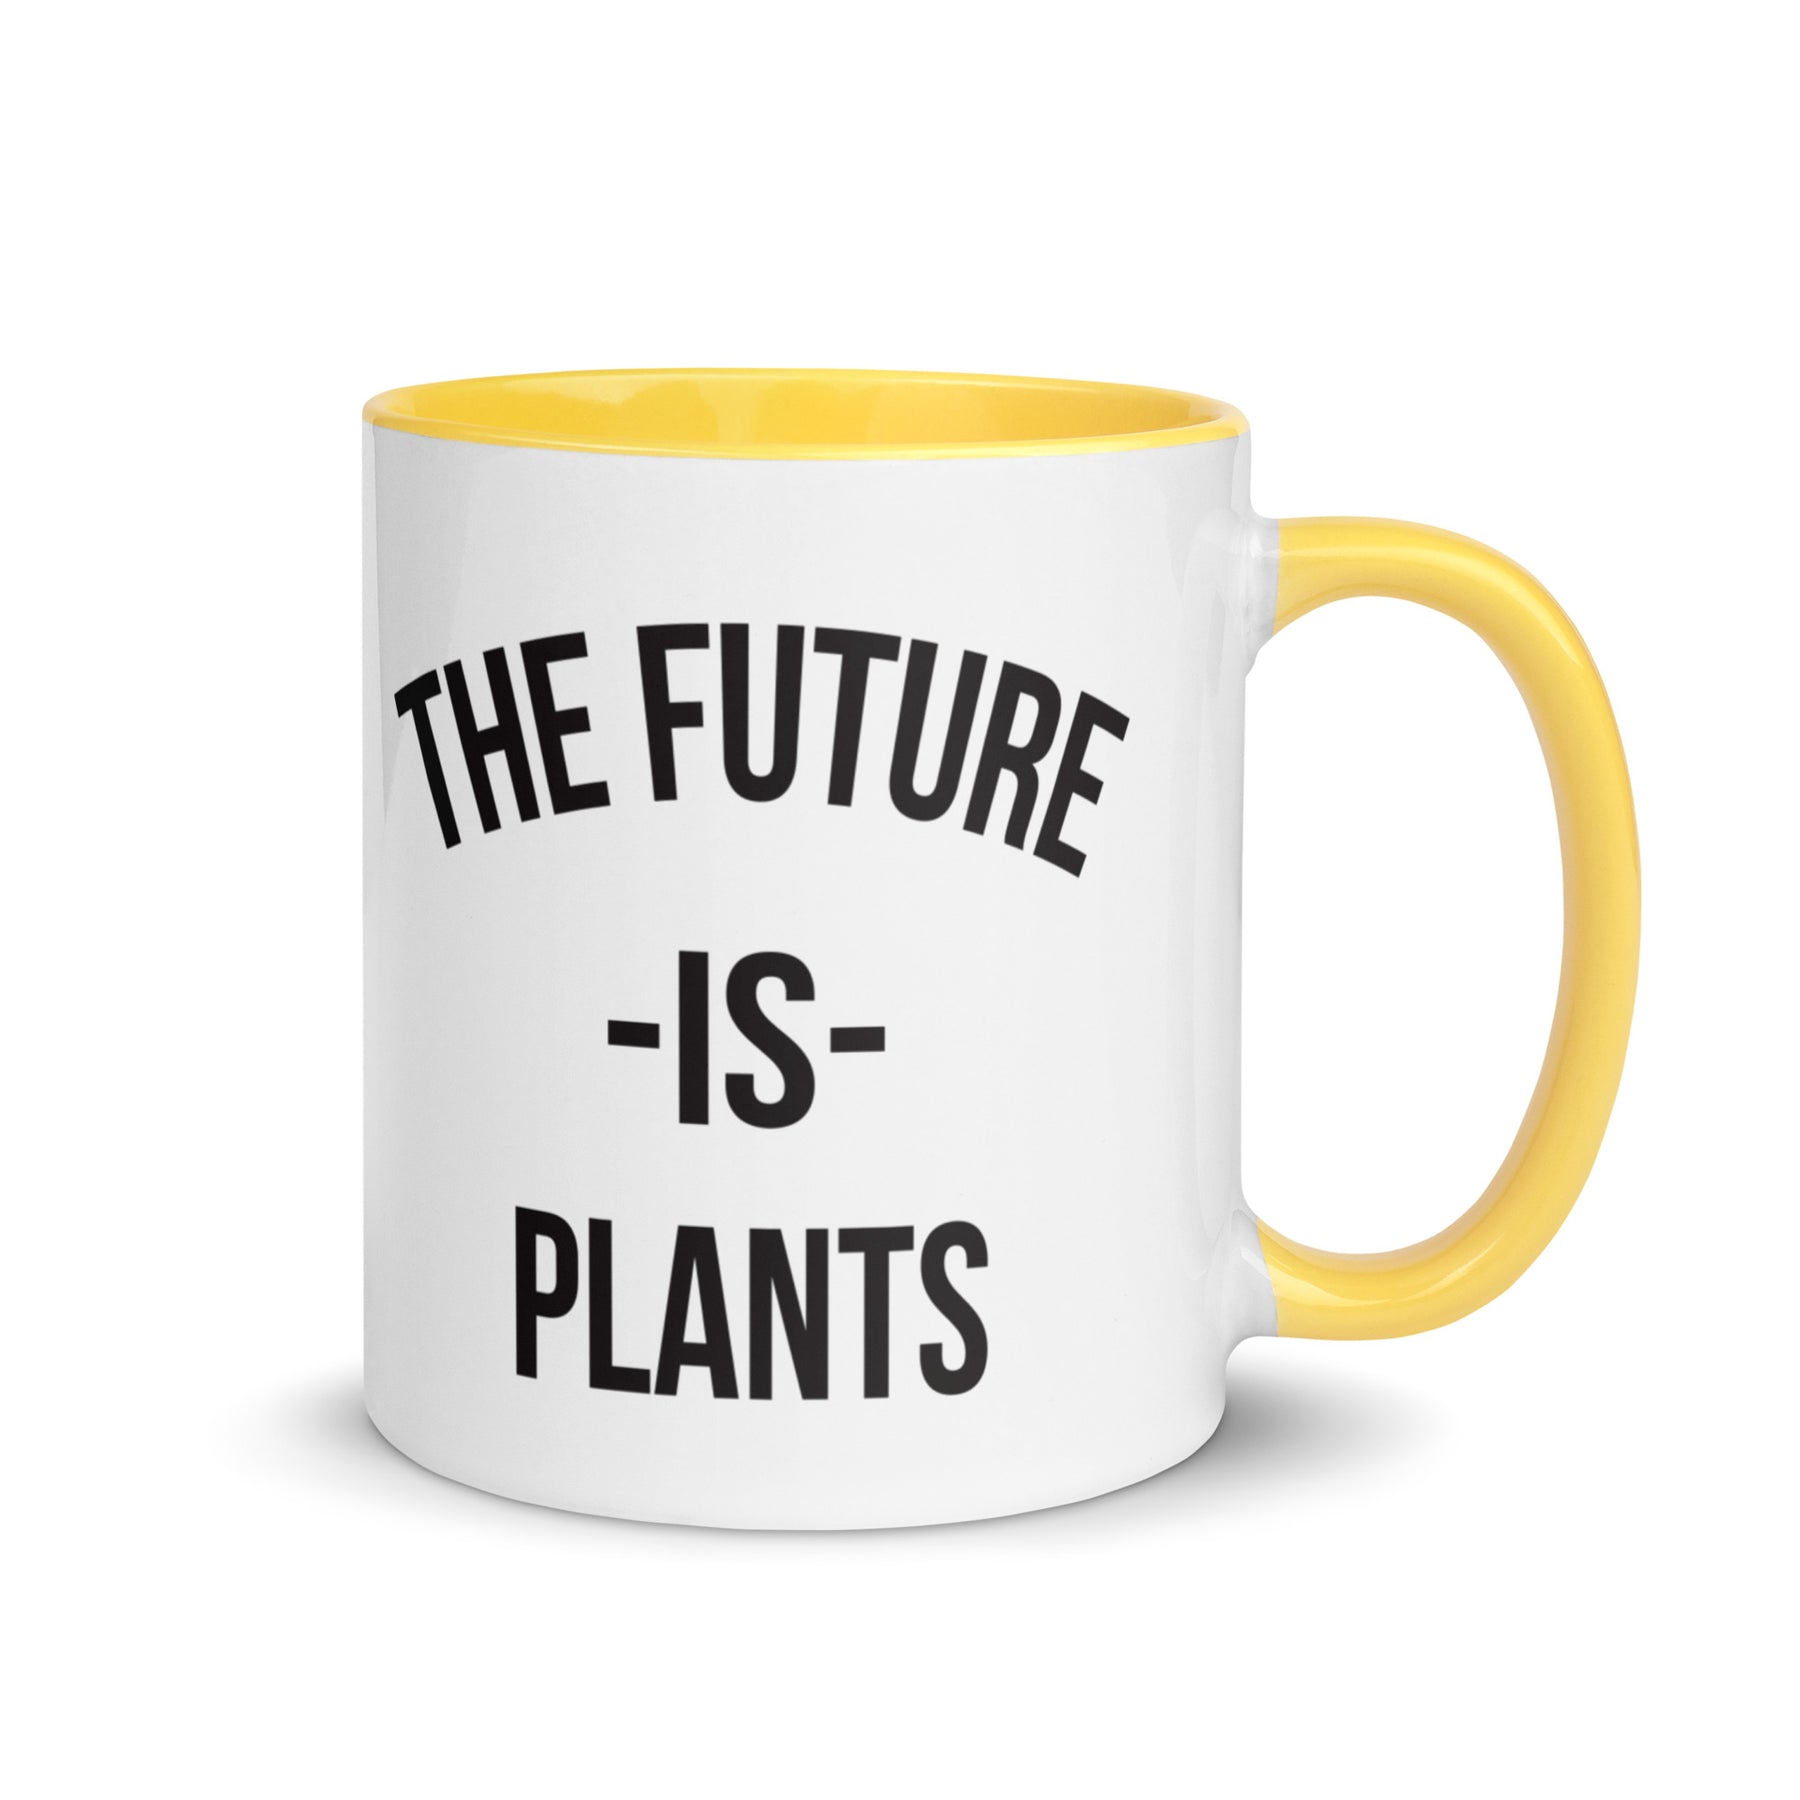 FUTURE IS PLANTS Mug with Color Inside